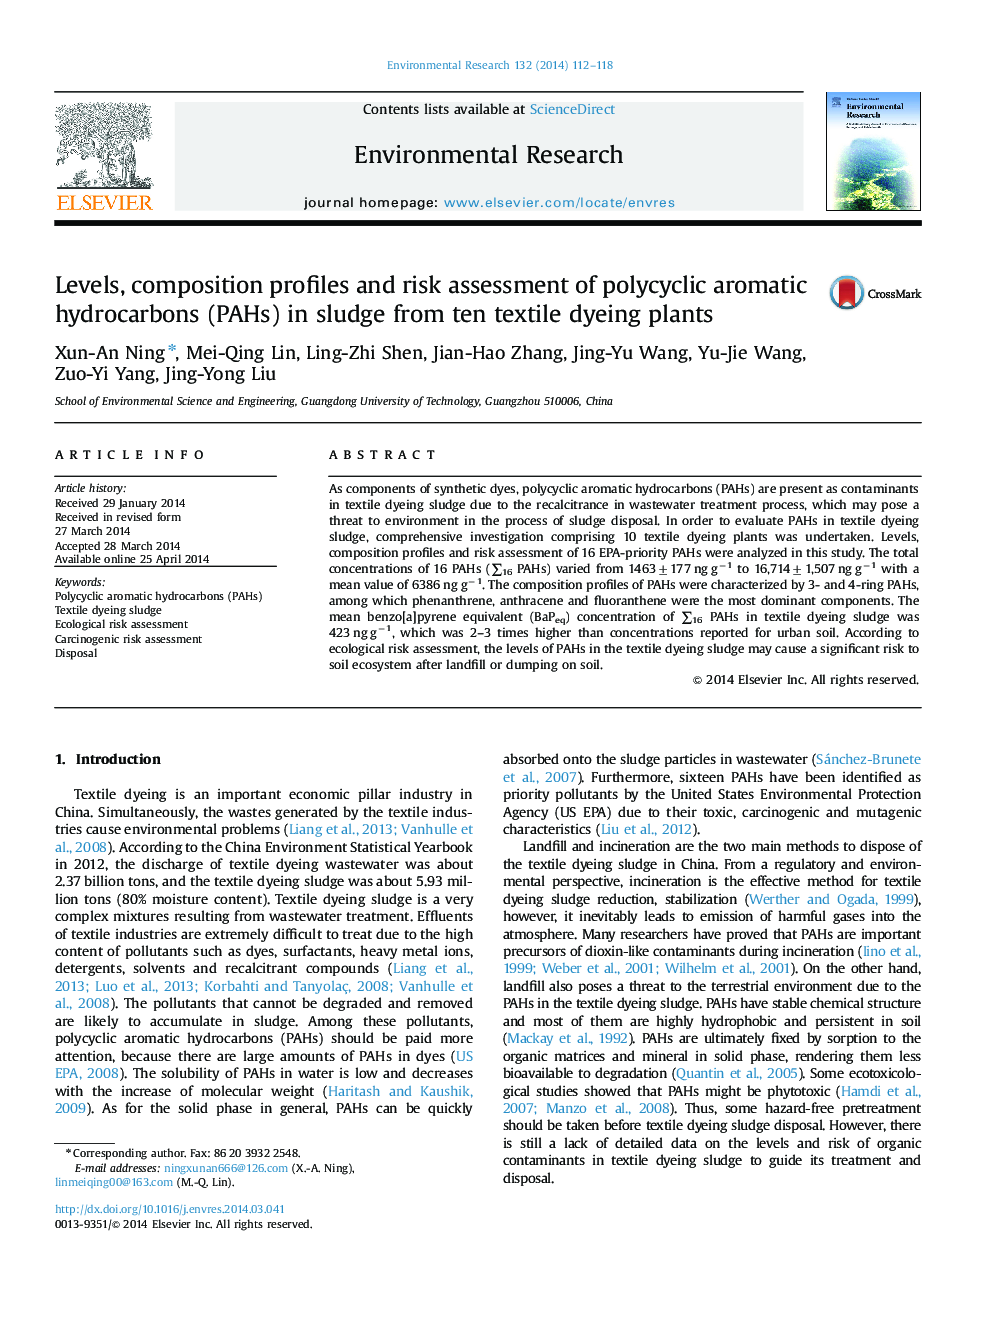 Levels, composition profiles and risk assessment of polycyclic aromatic hydrocarbons (PAHs) in sludge from ten textile dyeing plants